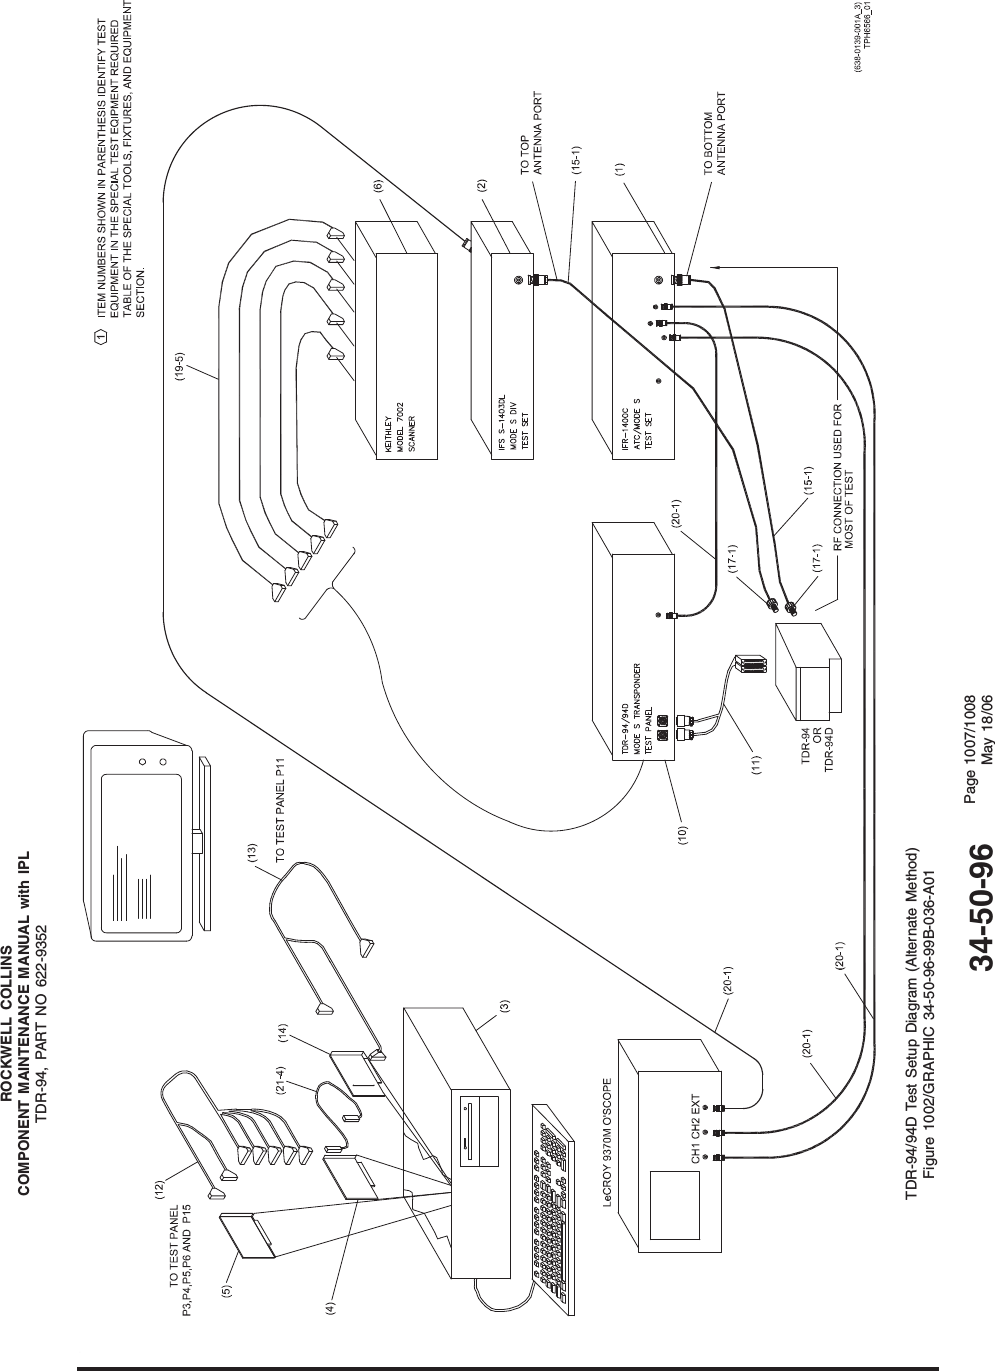 ROCKWELL COLLINSCOMPONENT MAINTENANCE MANUAL with IPLTDR-94, PART NO 622-9352TDR-94/94D Test Setup Diagram (Alternate Method)Figure 1002/GRAPHIC 34-50-96-99B-036-A0134-50-96 Page 1007/1008May 18/06